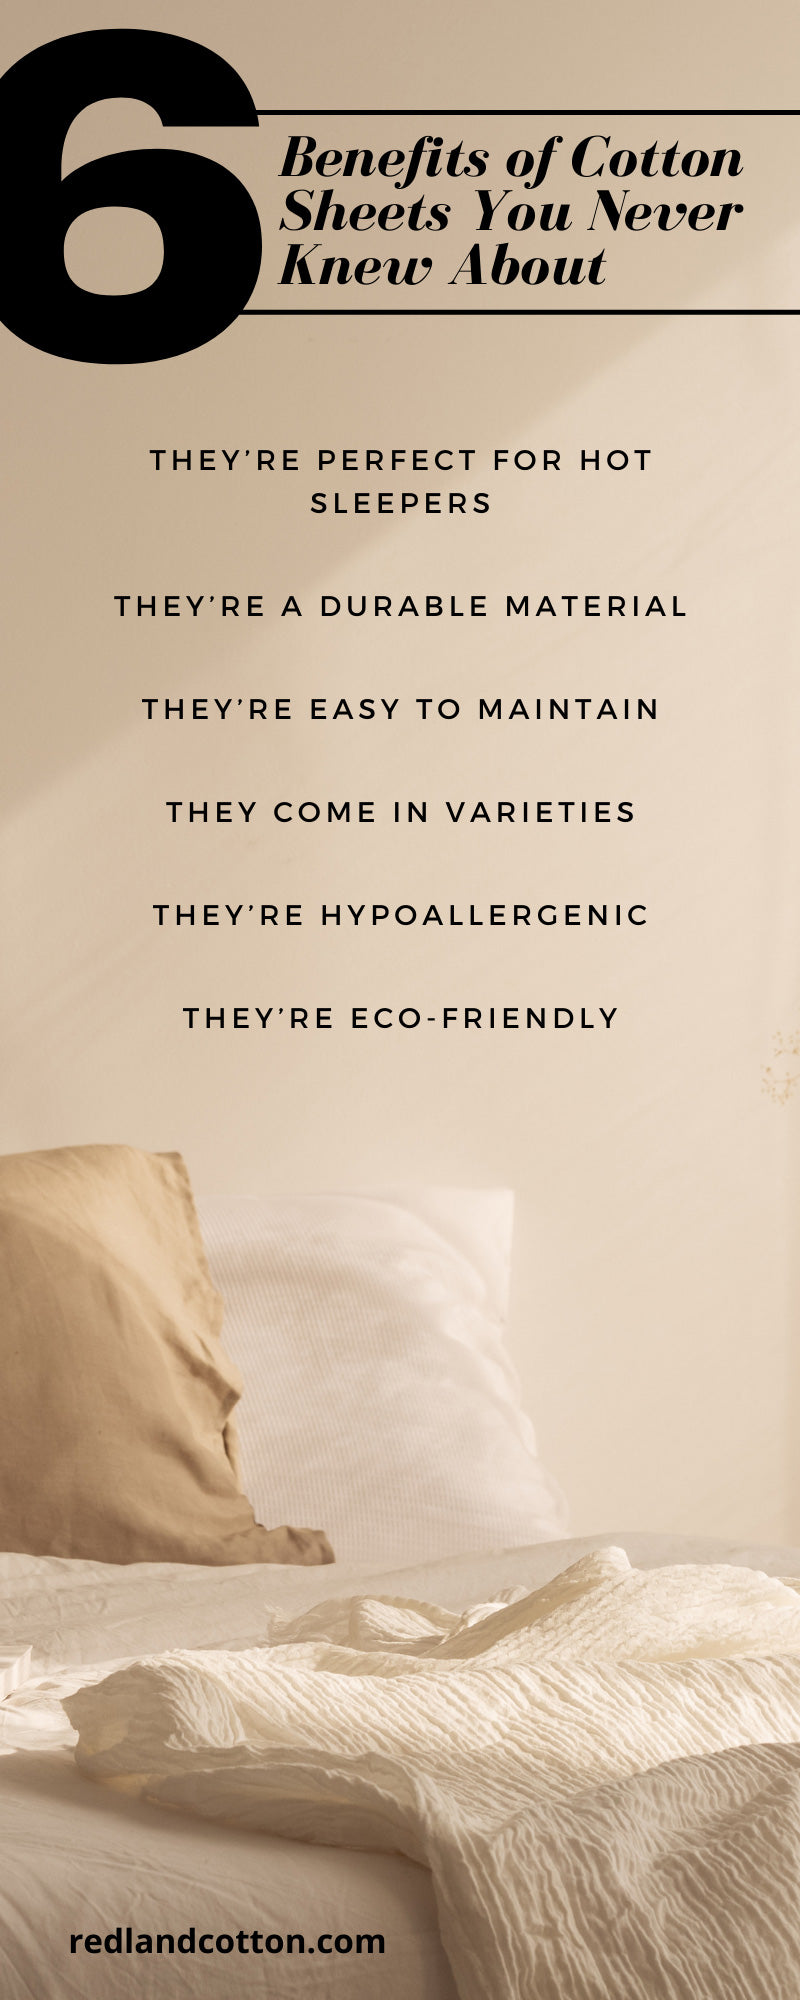 6 Benefits of Cotton Sheets You Never Knew About